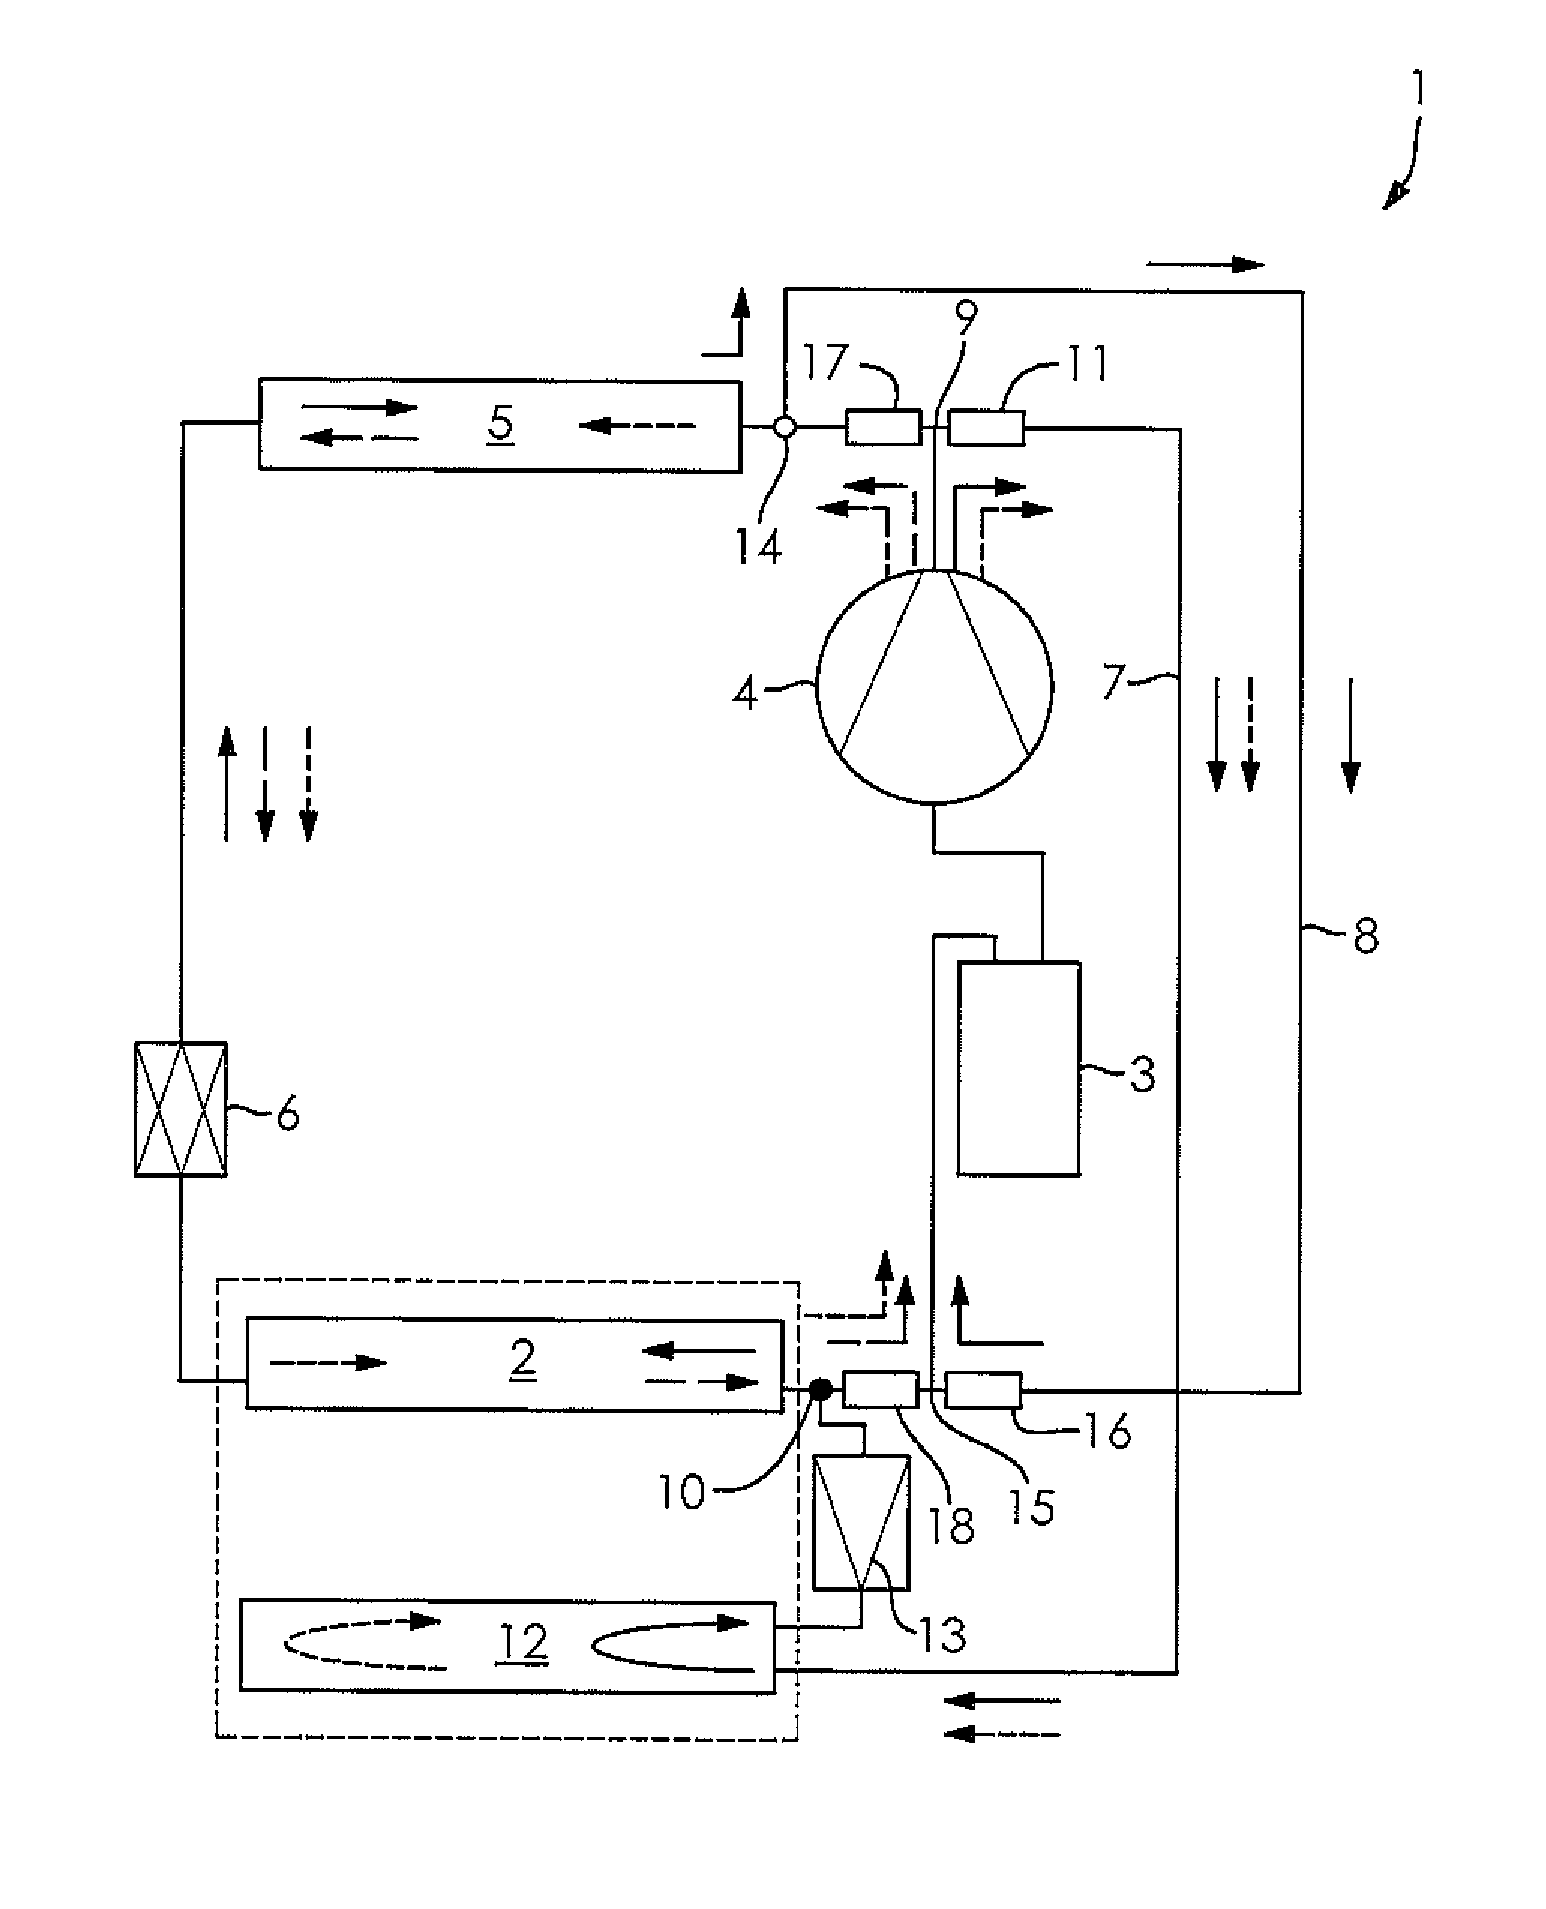 Refrigerant circuit of an air conditioner with heat pump